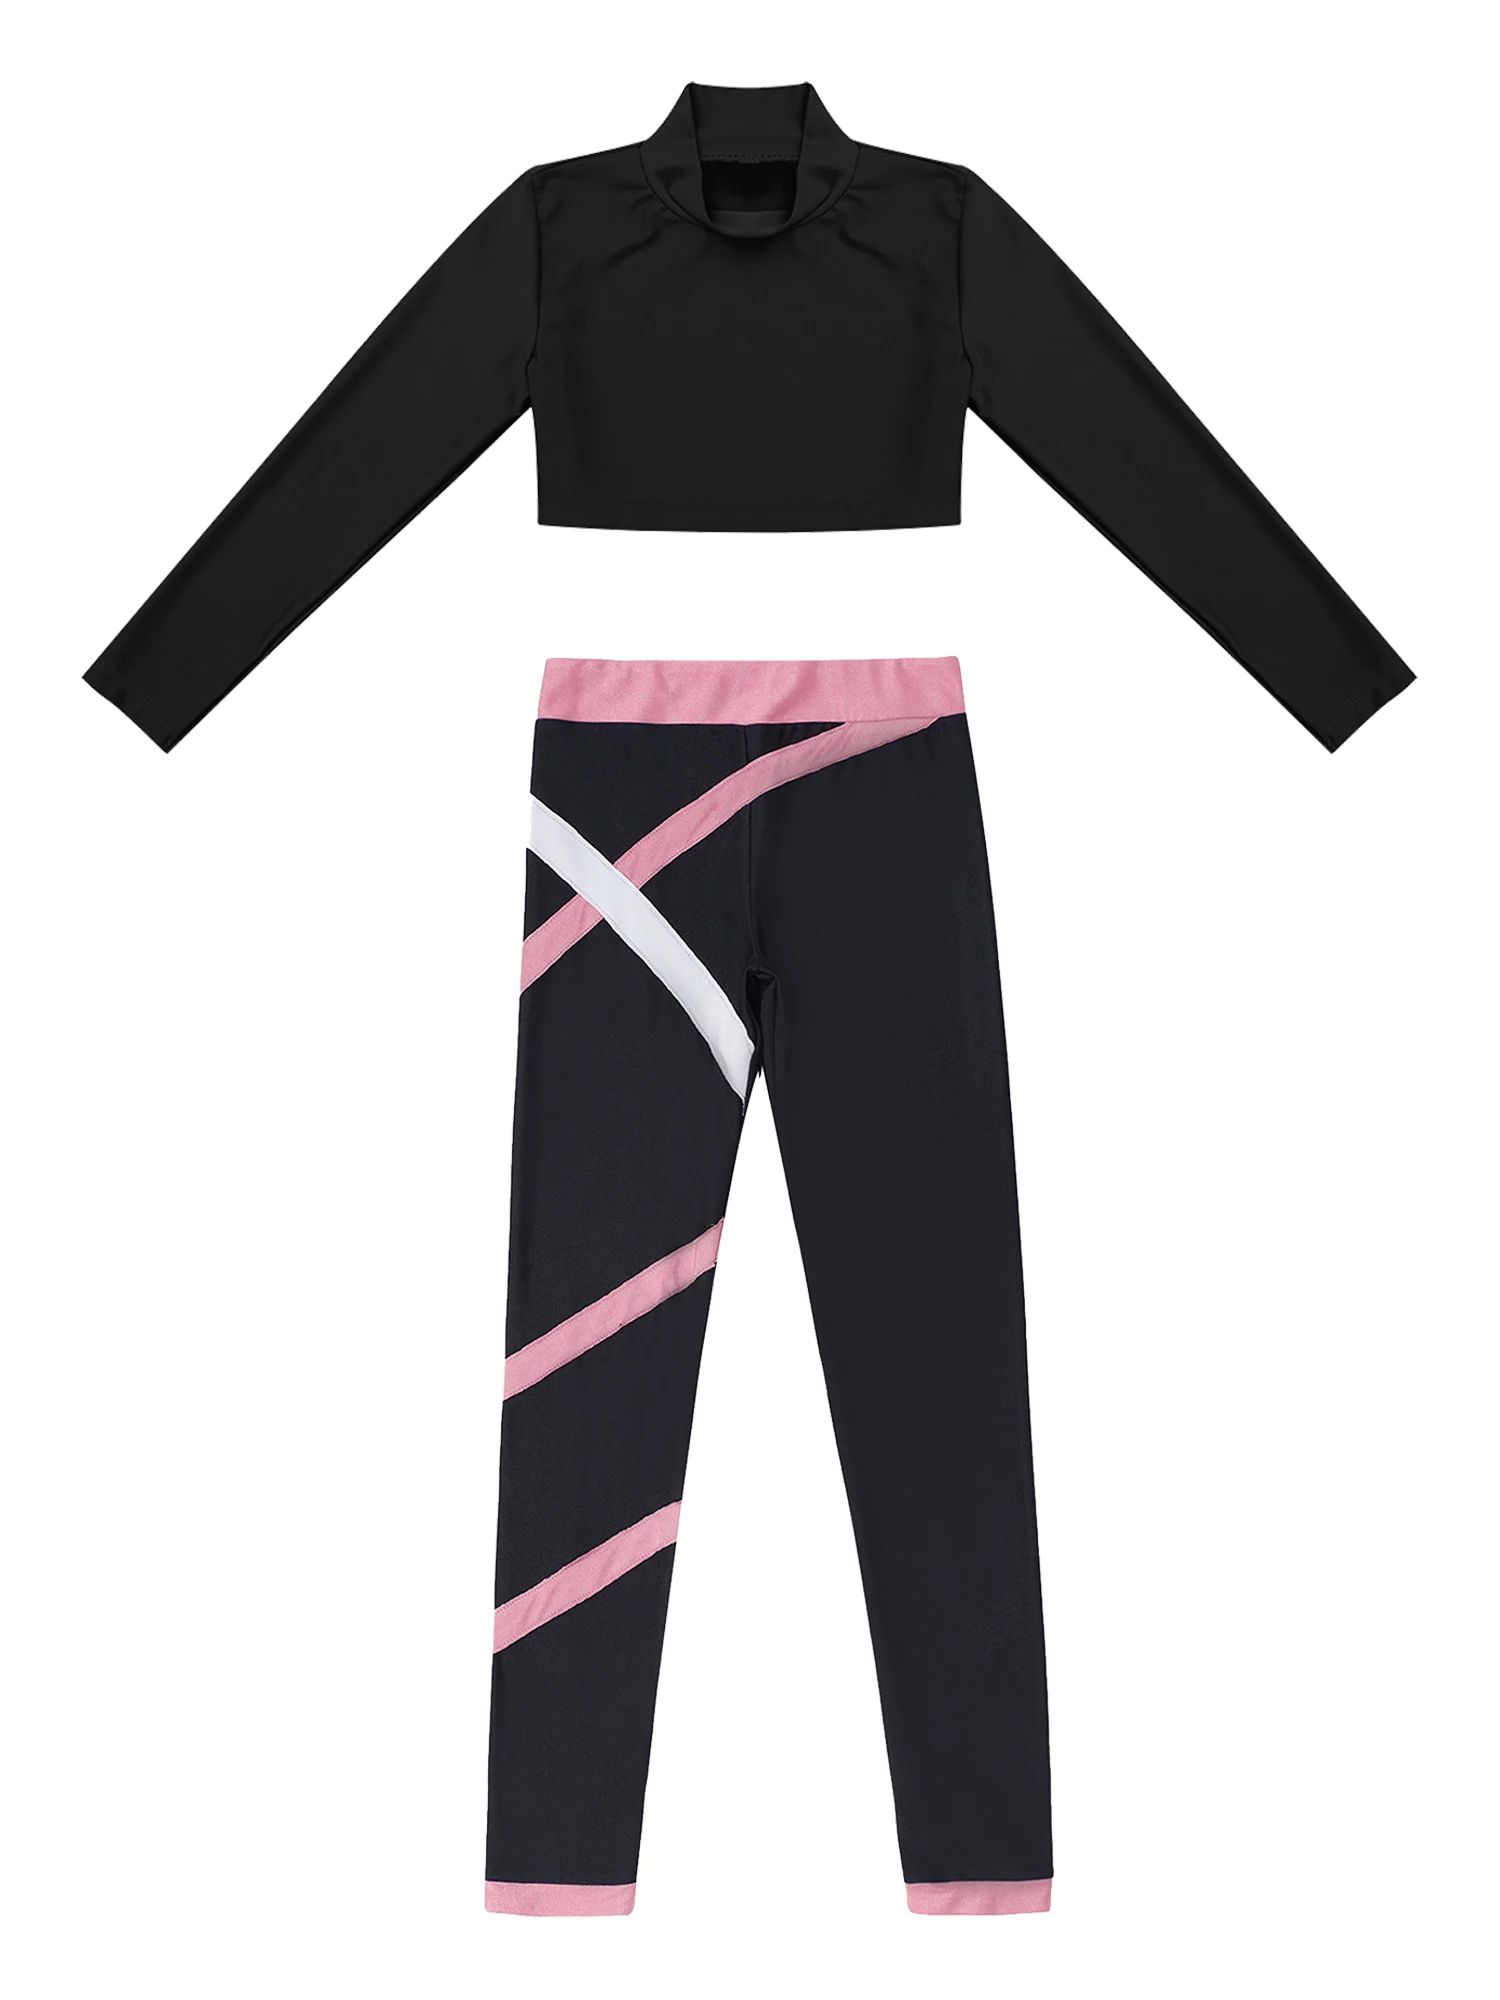 Kids Girls Sports Wear Long Sleeves Stretchy Skinny Crop Tops with Colorblock Leggings Set for Gym Yoga Figure Skating Workout